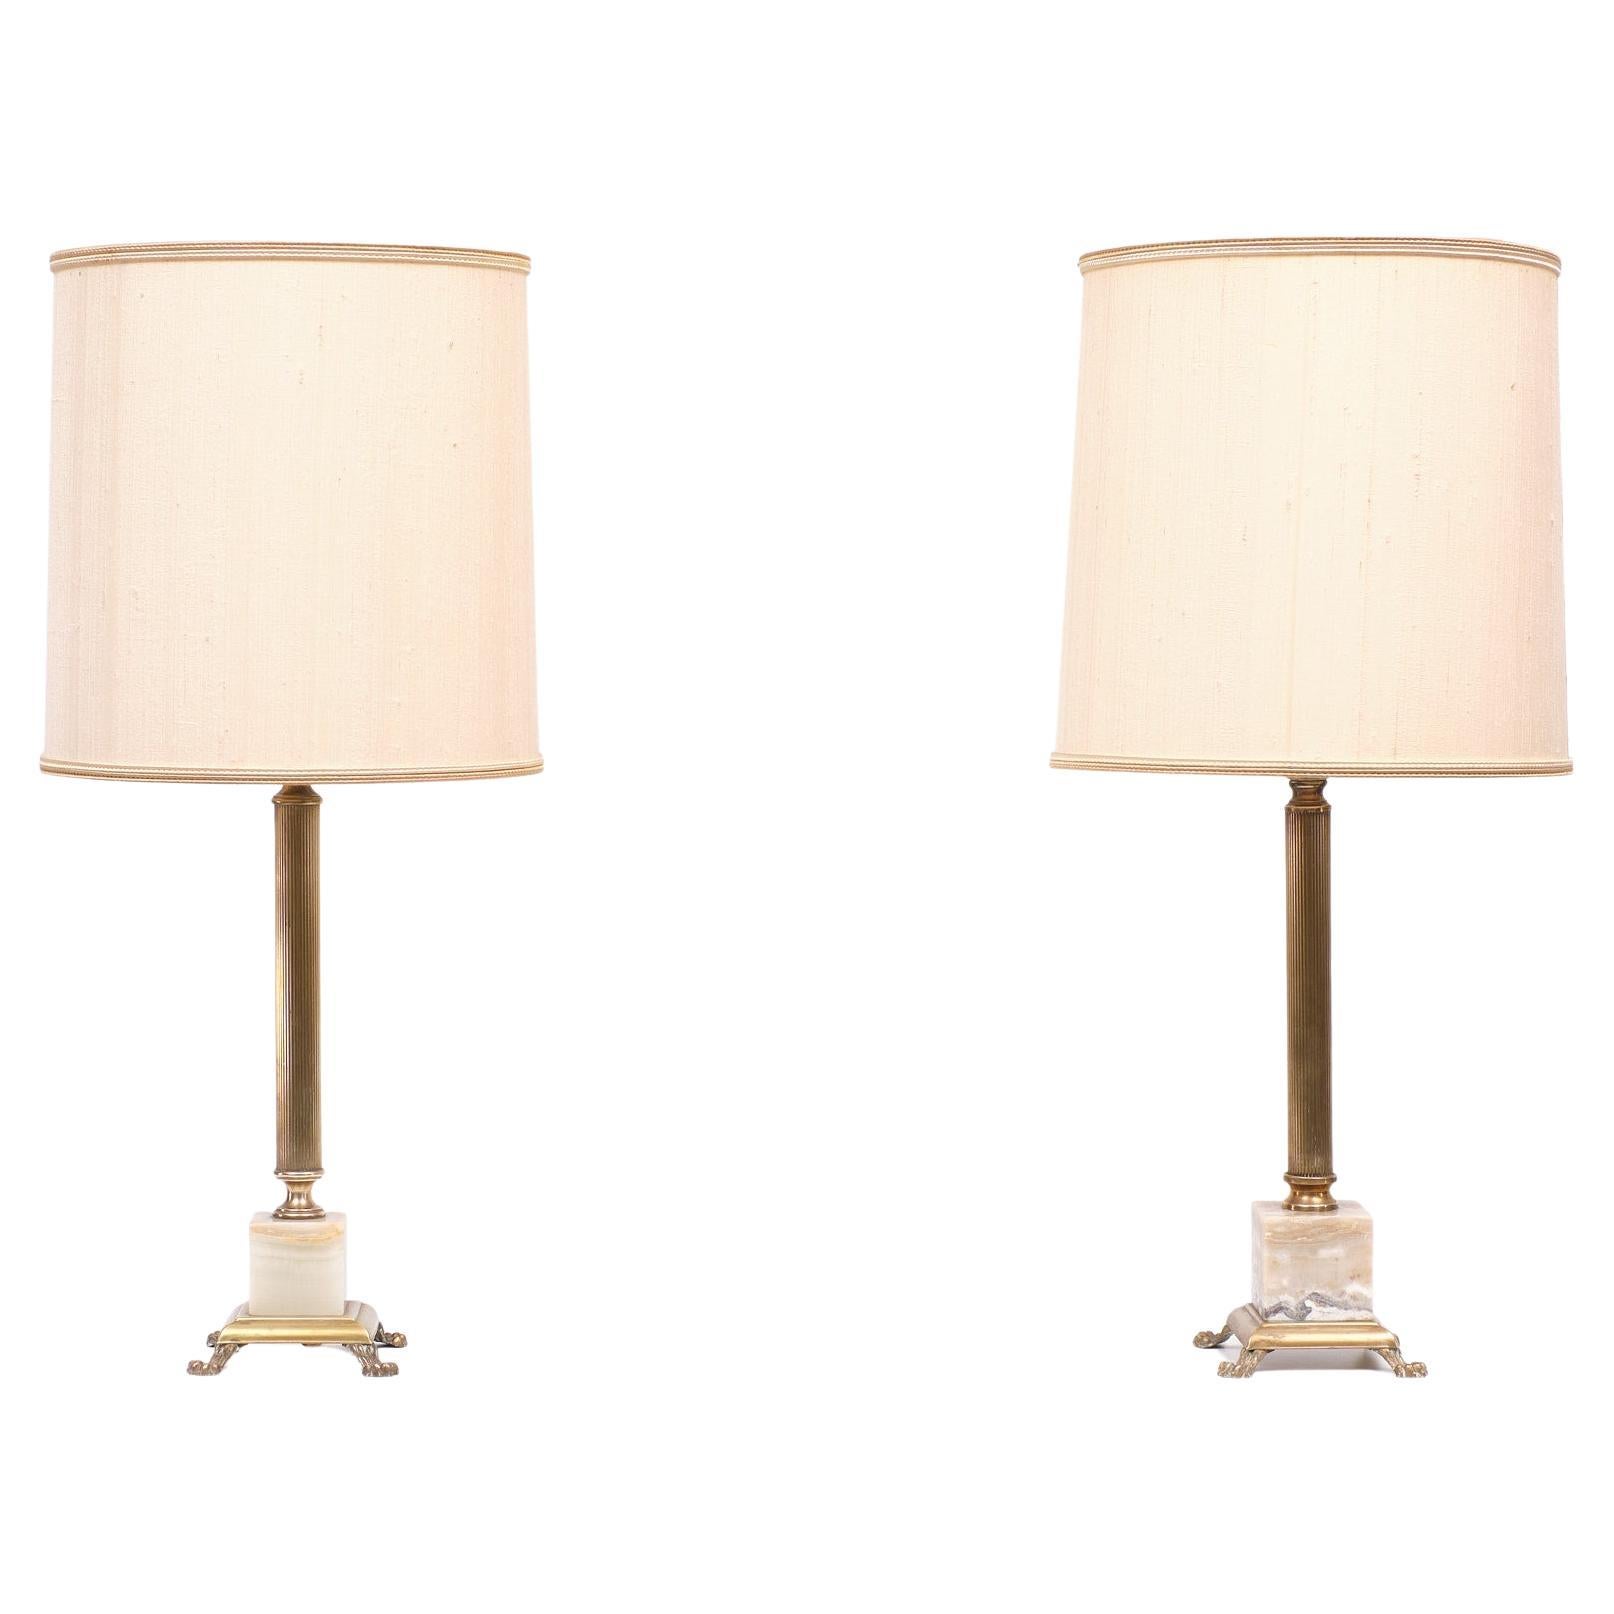 Two Classic Colum Table Lamps, 1960s, France For Sale